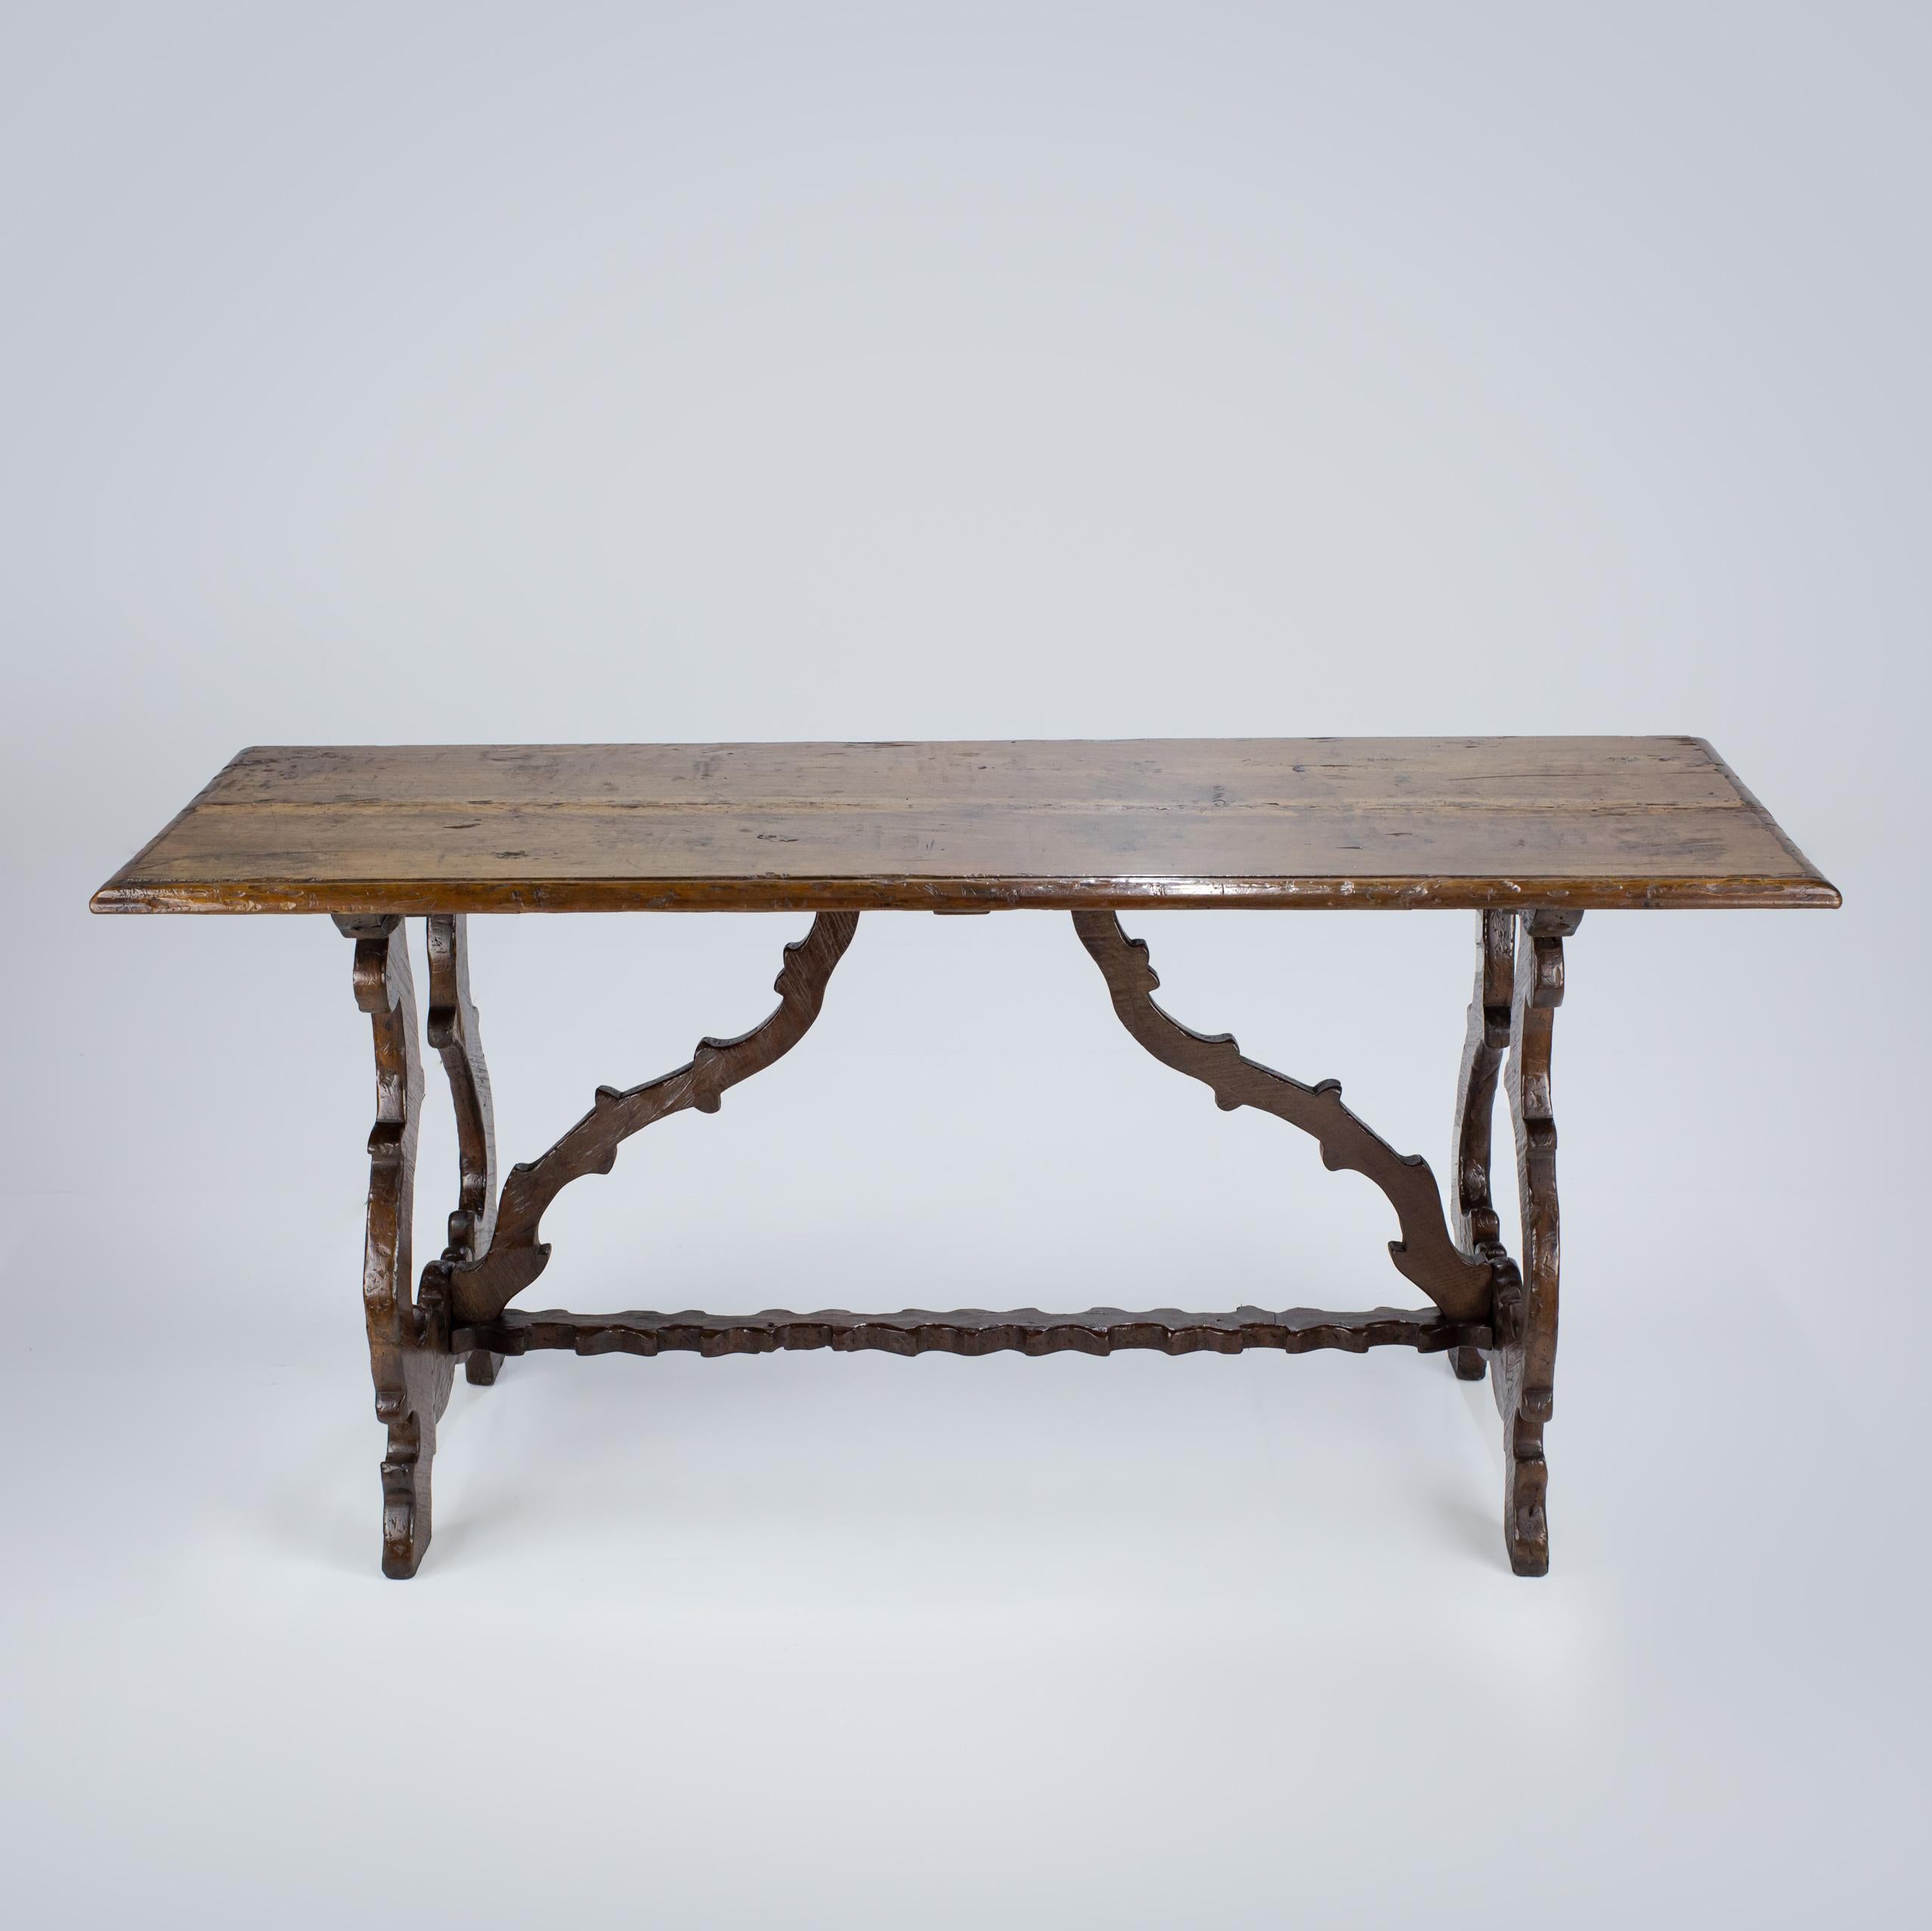 Early 19th Century Italian Trestle Table. Impressive patination and extraordinary stretchers. Wear and Patination as expected. Walnut. Italy, Circa 1860.